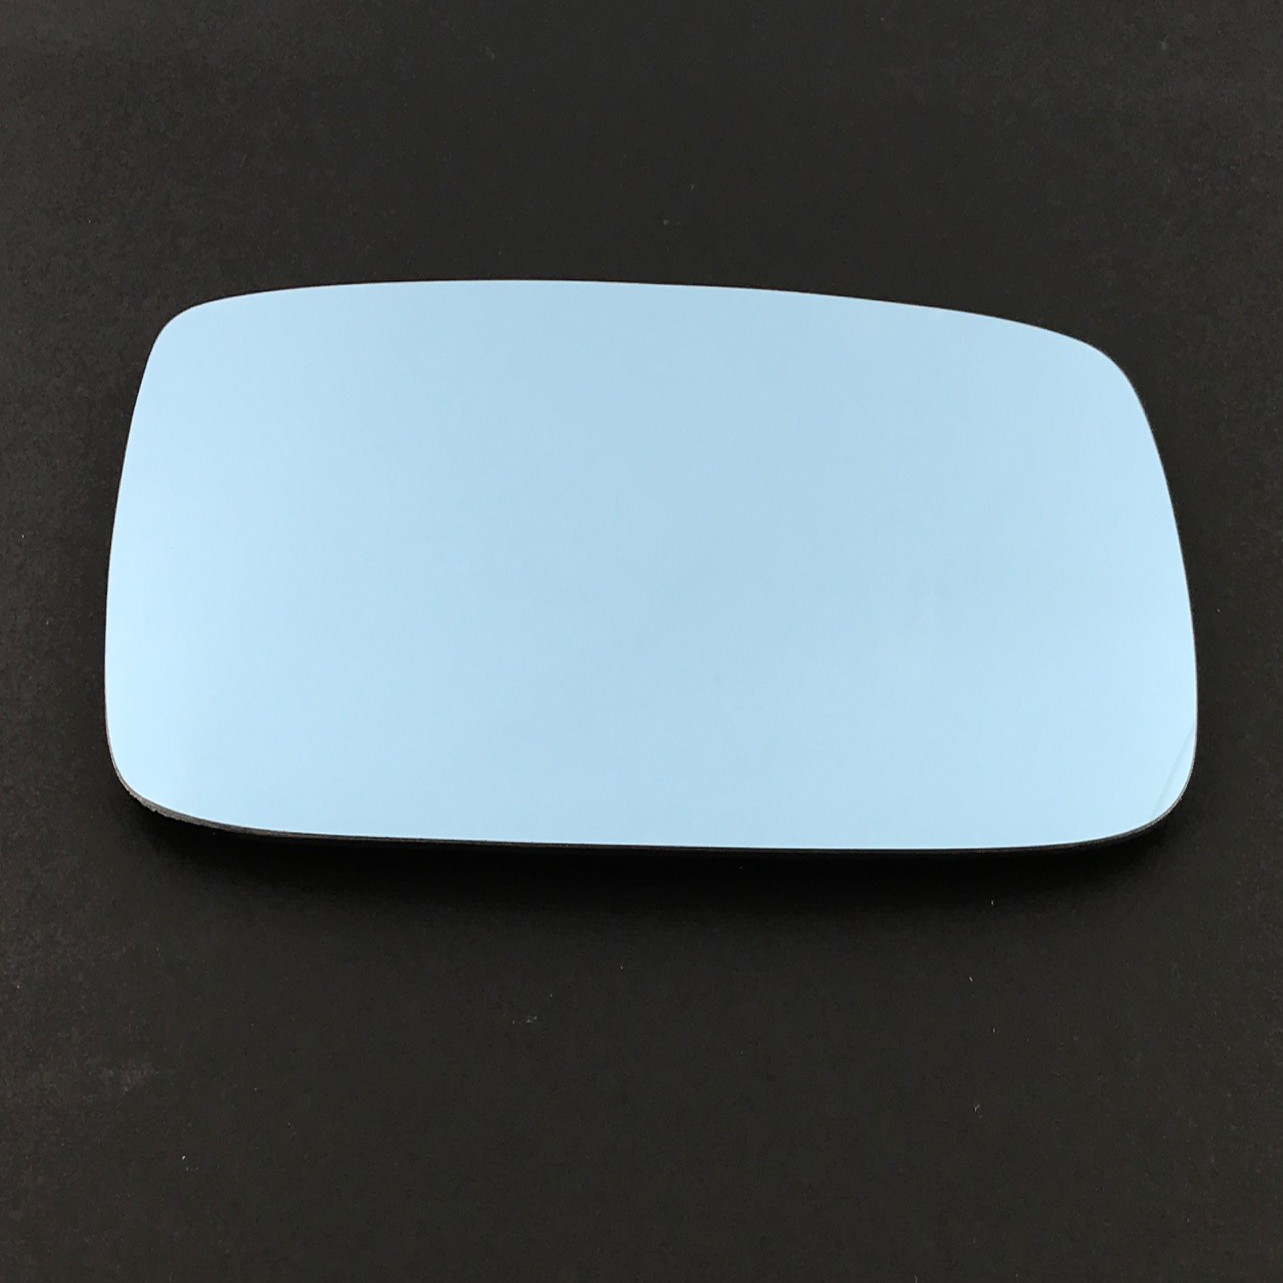 Volvo V90 Wing Mirror Glass LEFT HAND ( UK Passenger Side ) 1997 to 1998 – Convex Wing Mirror ( Blue Tinted )